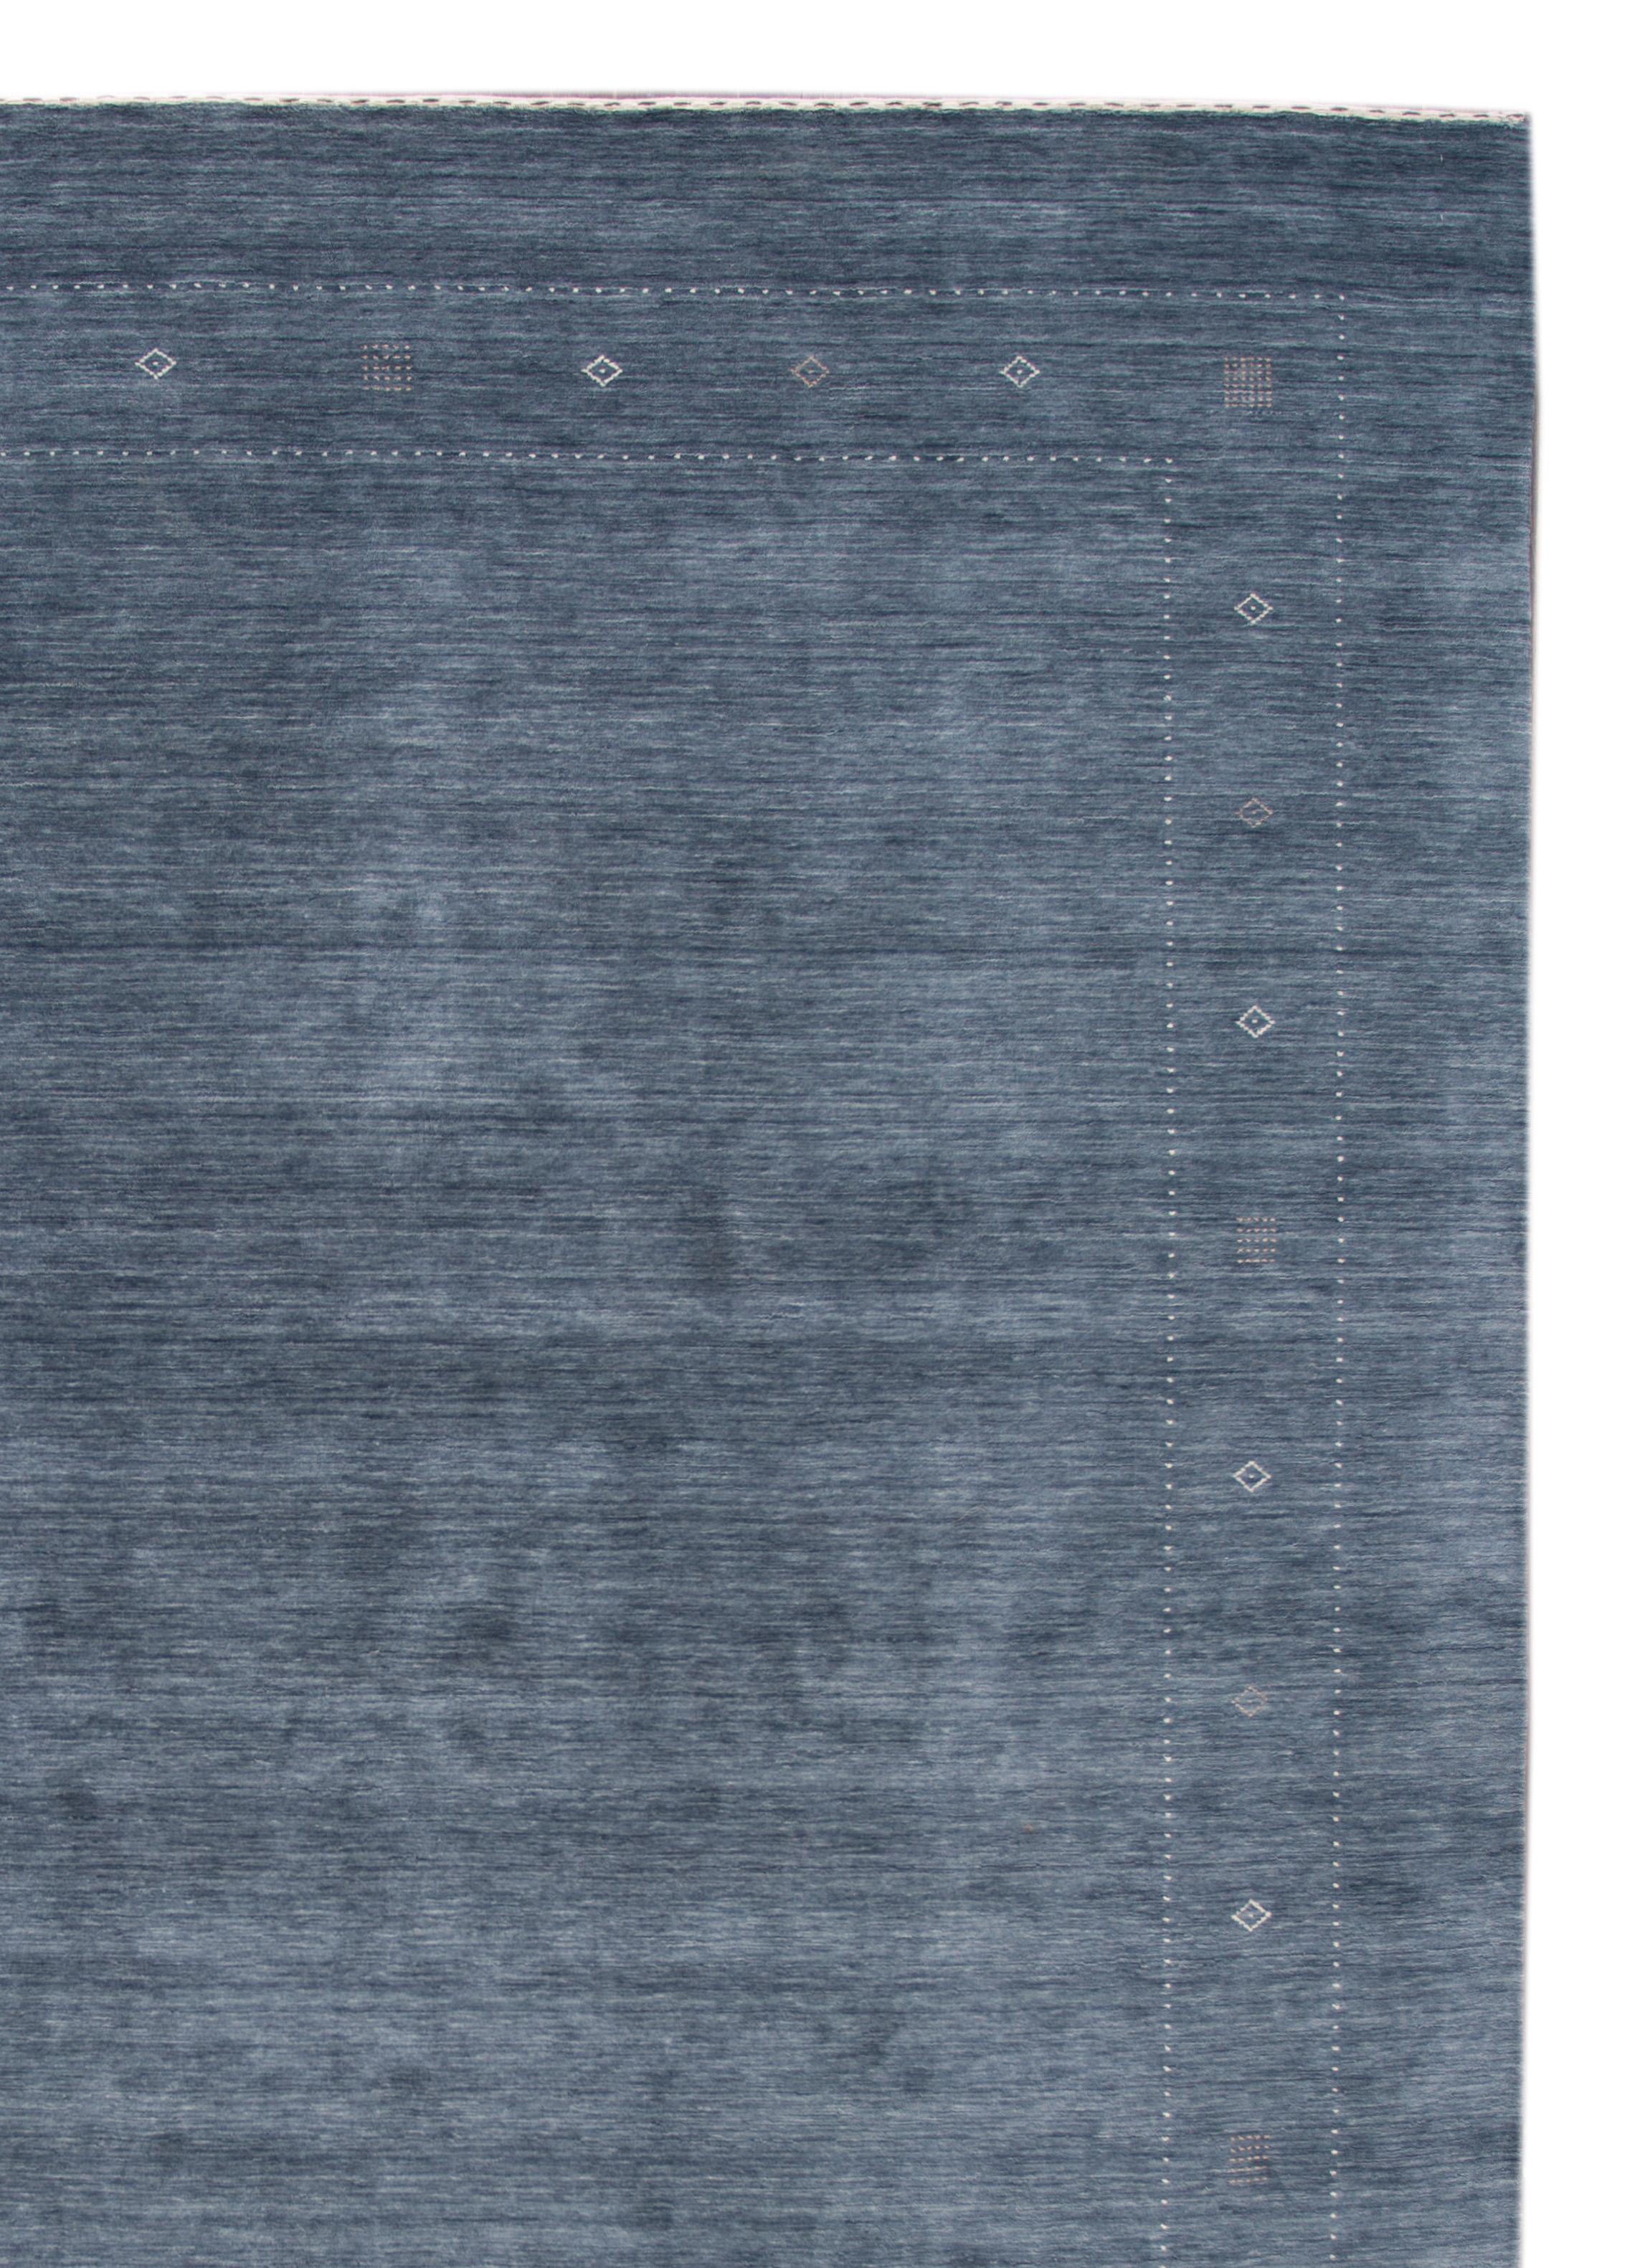 Modern 21st century Gabbeh rug, with a blue color field and subtle ivory accents.
This rug measures 10' 0